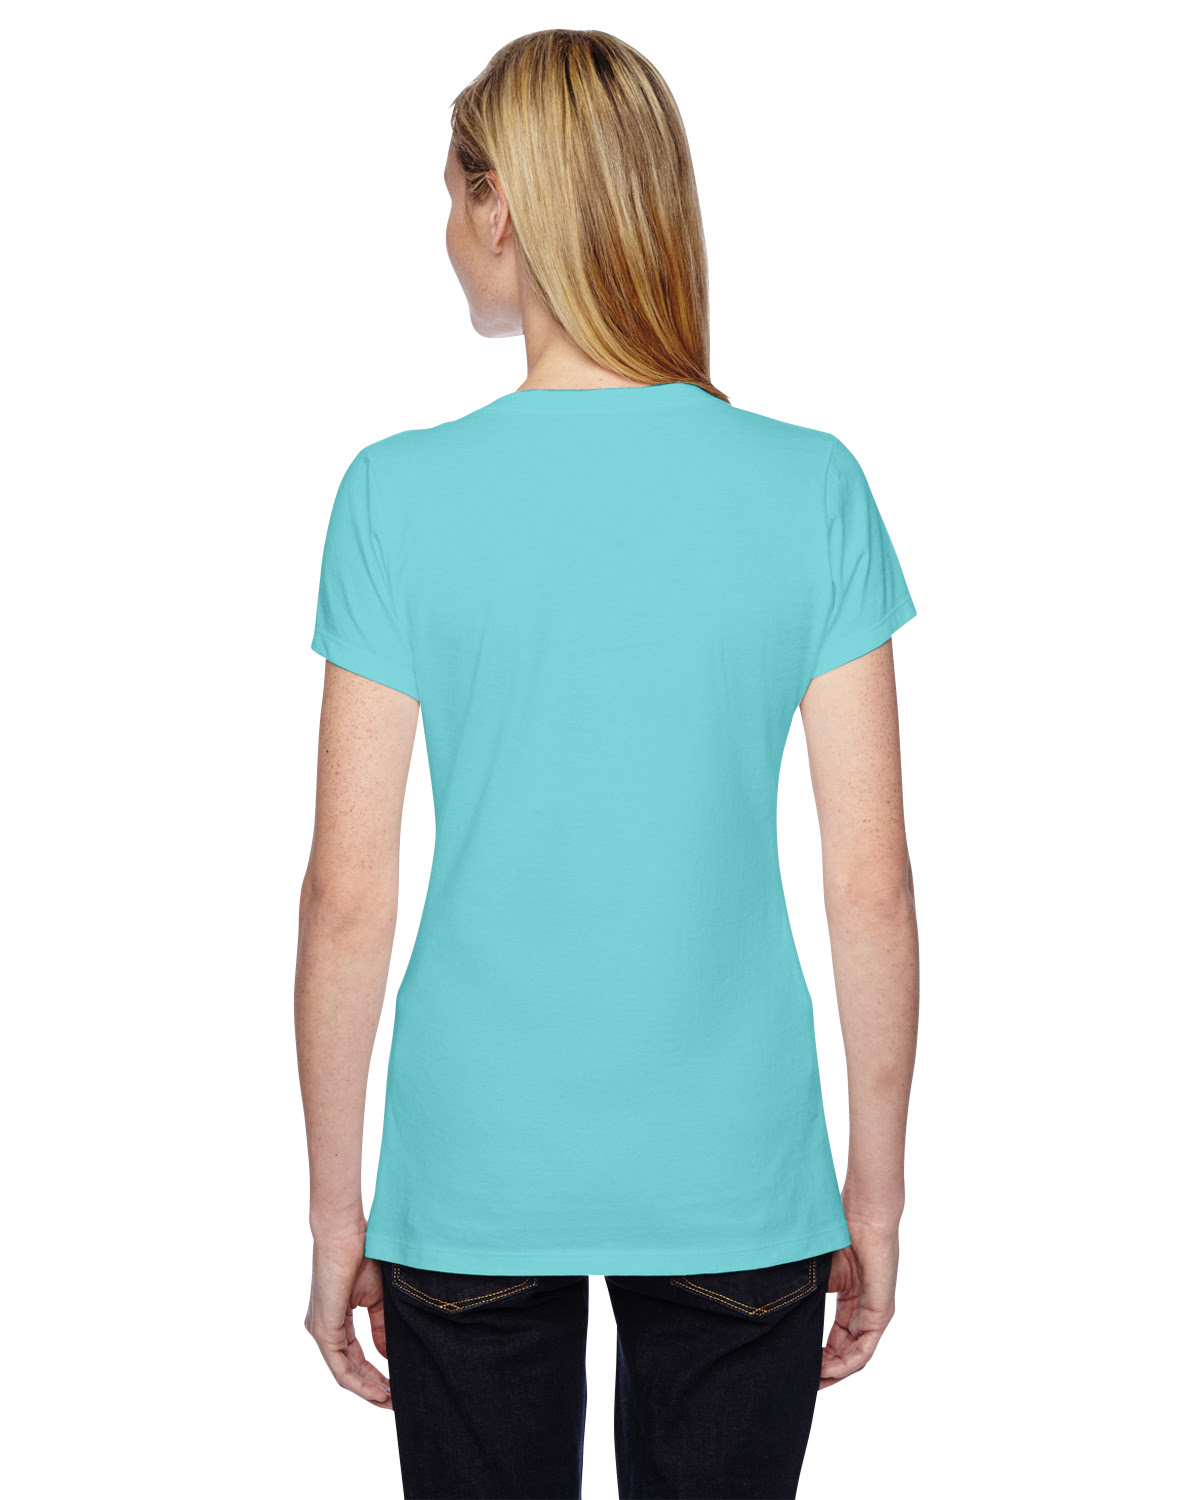 Fruit of the loom t shirts for women v neck - Fruit of the Loom 5oz Ladies